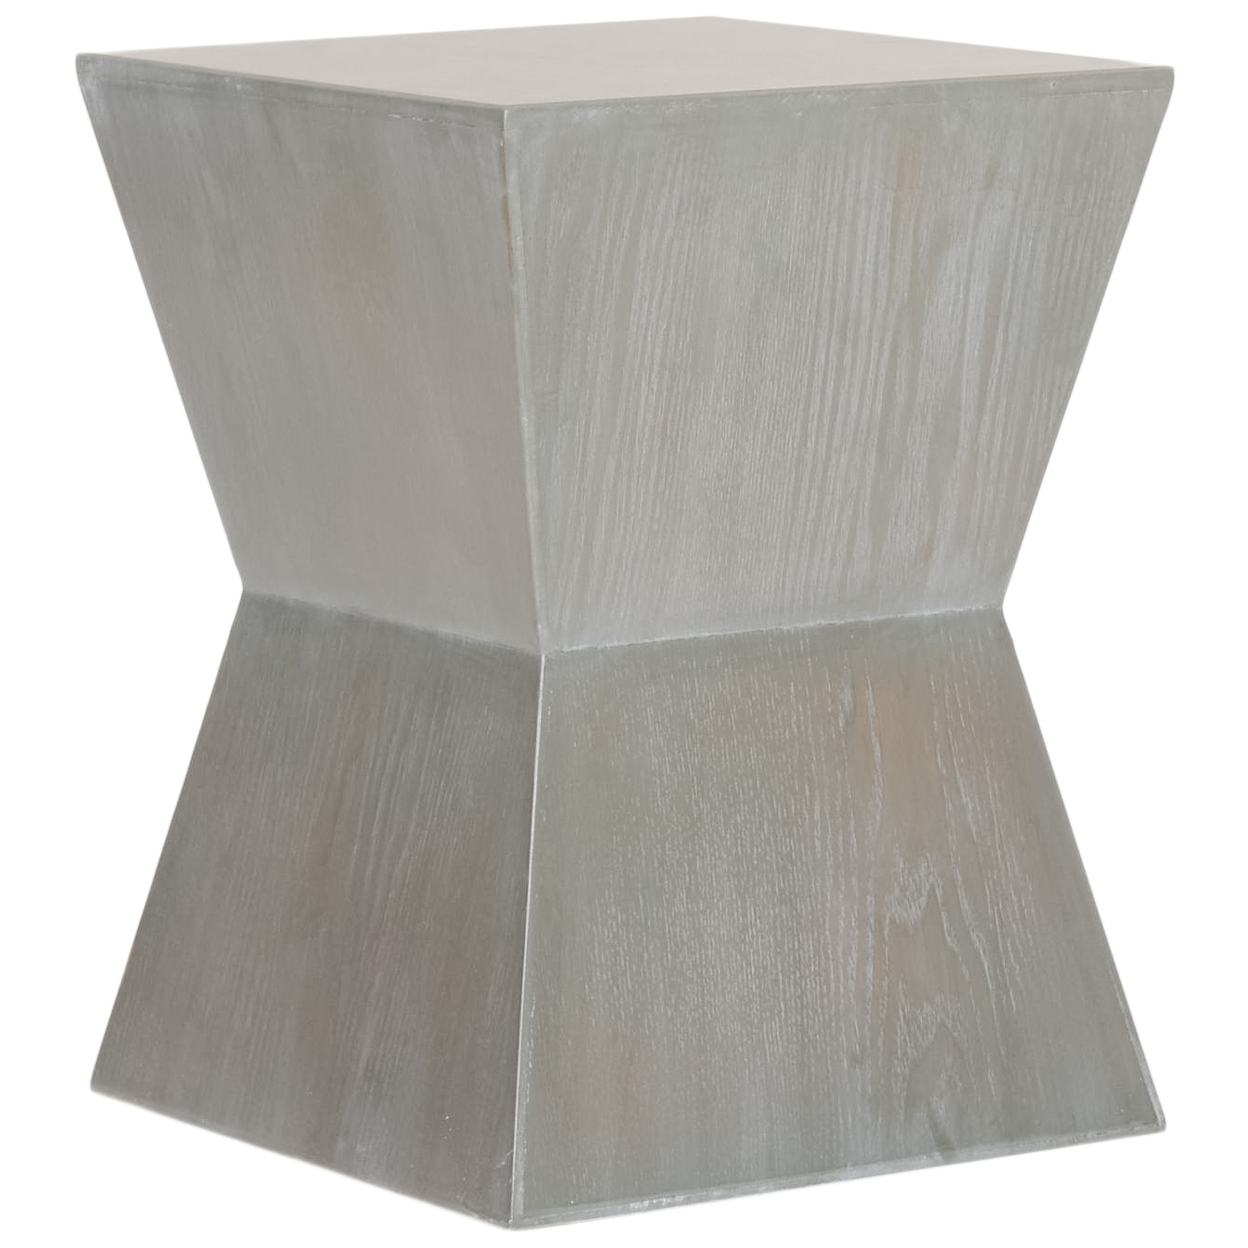 SAFAVIEH Lotem Curved Square Top Accent Table Ash Grey